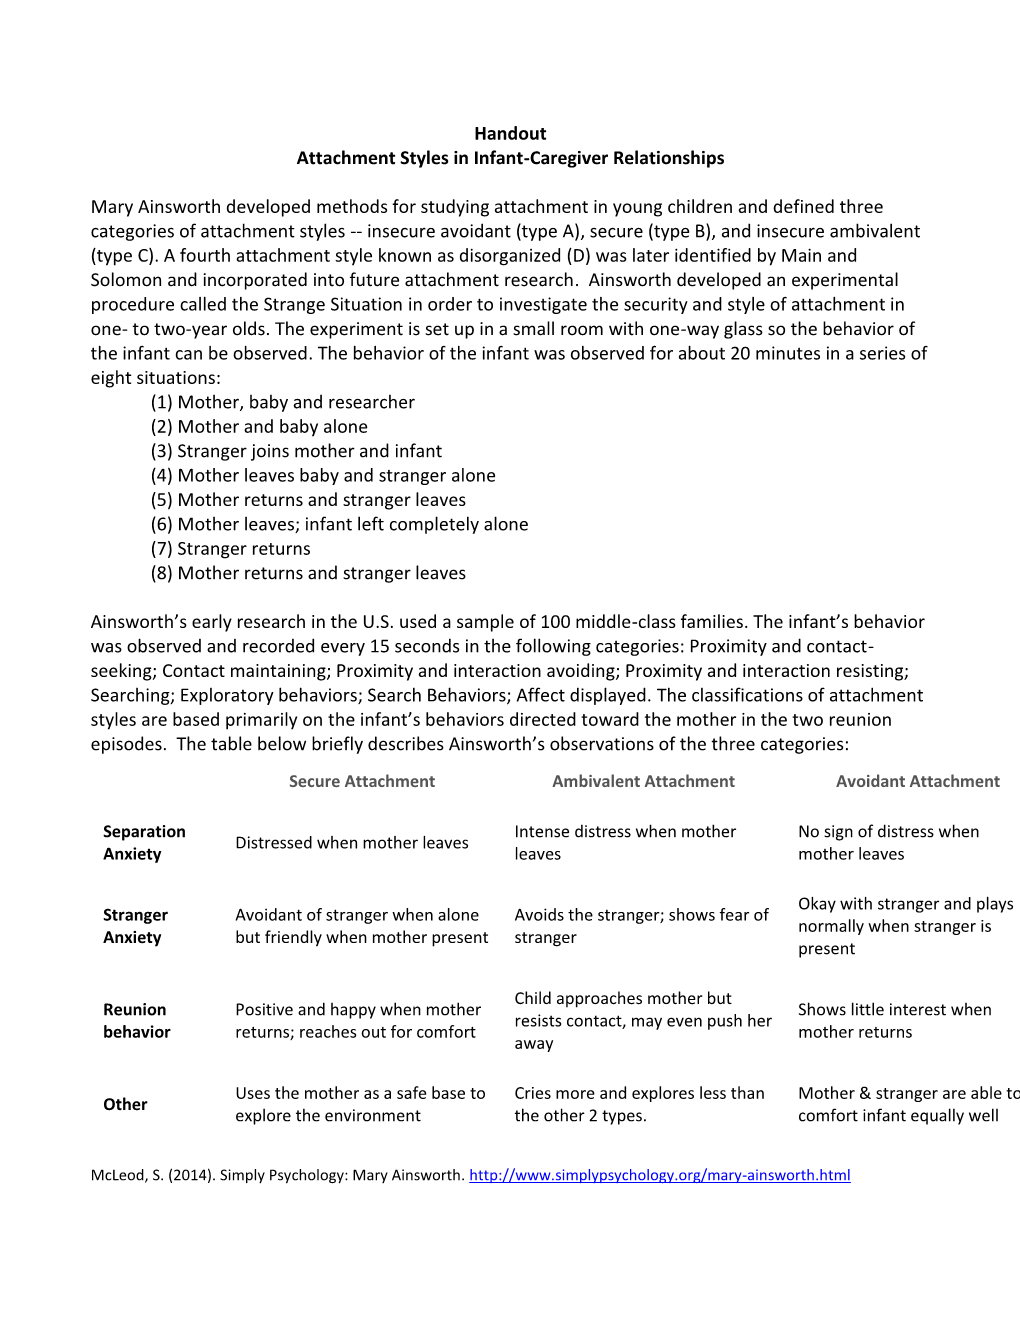 Handout Attachment Styles in Infant-Caregiver Relationships Mary Ainsworth Developed Methods for Studying Attachment in Young C